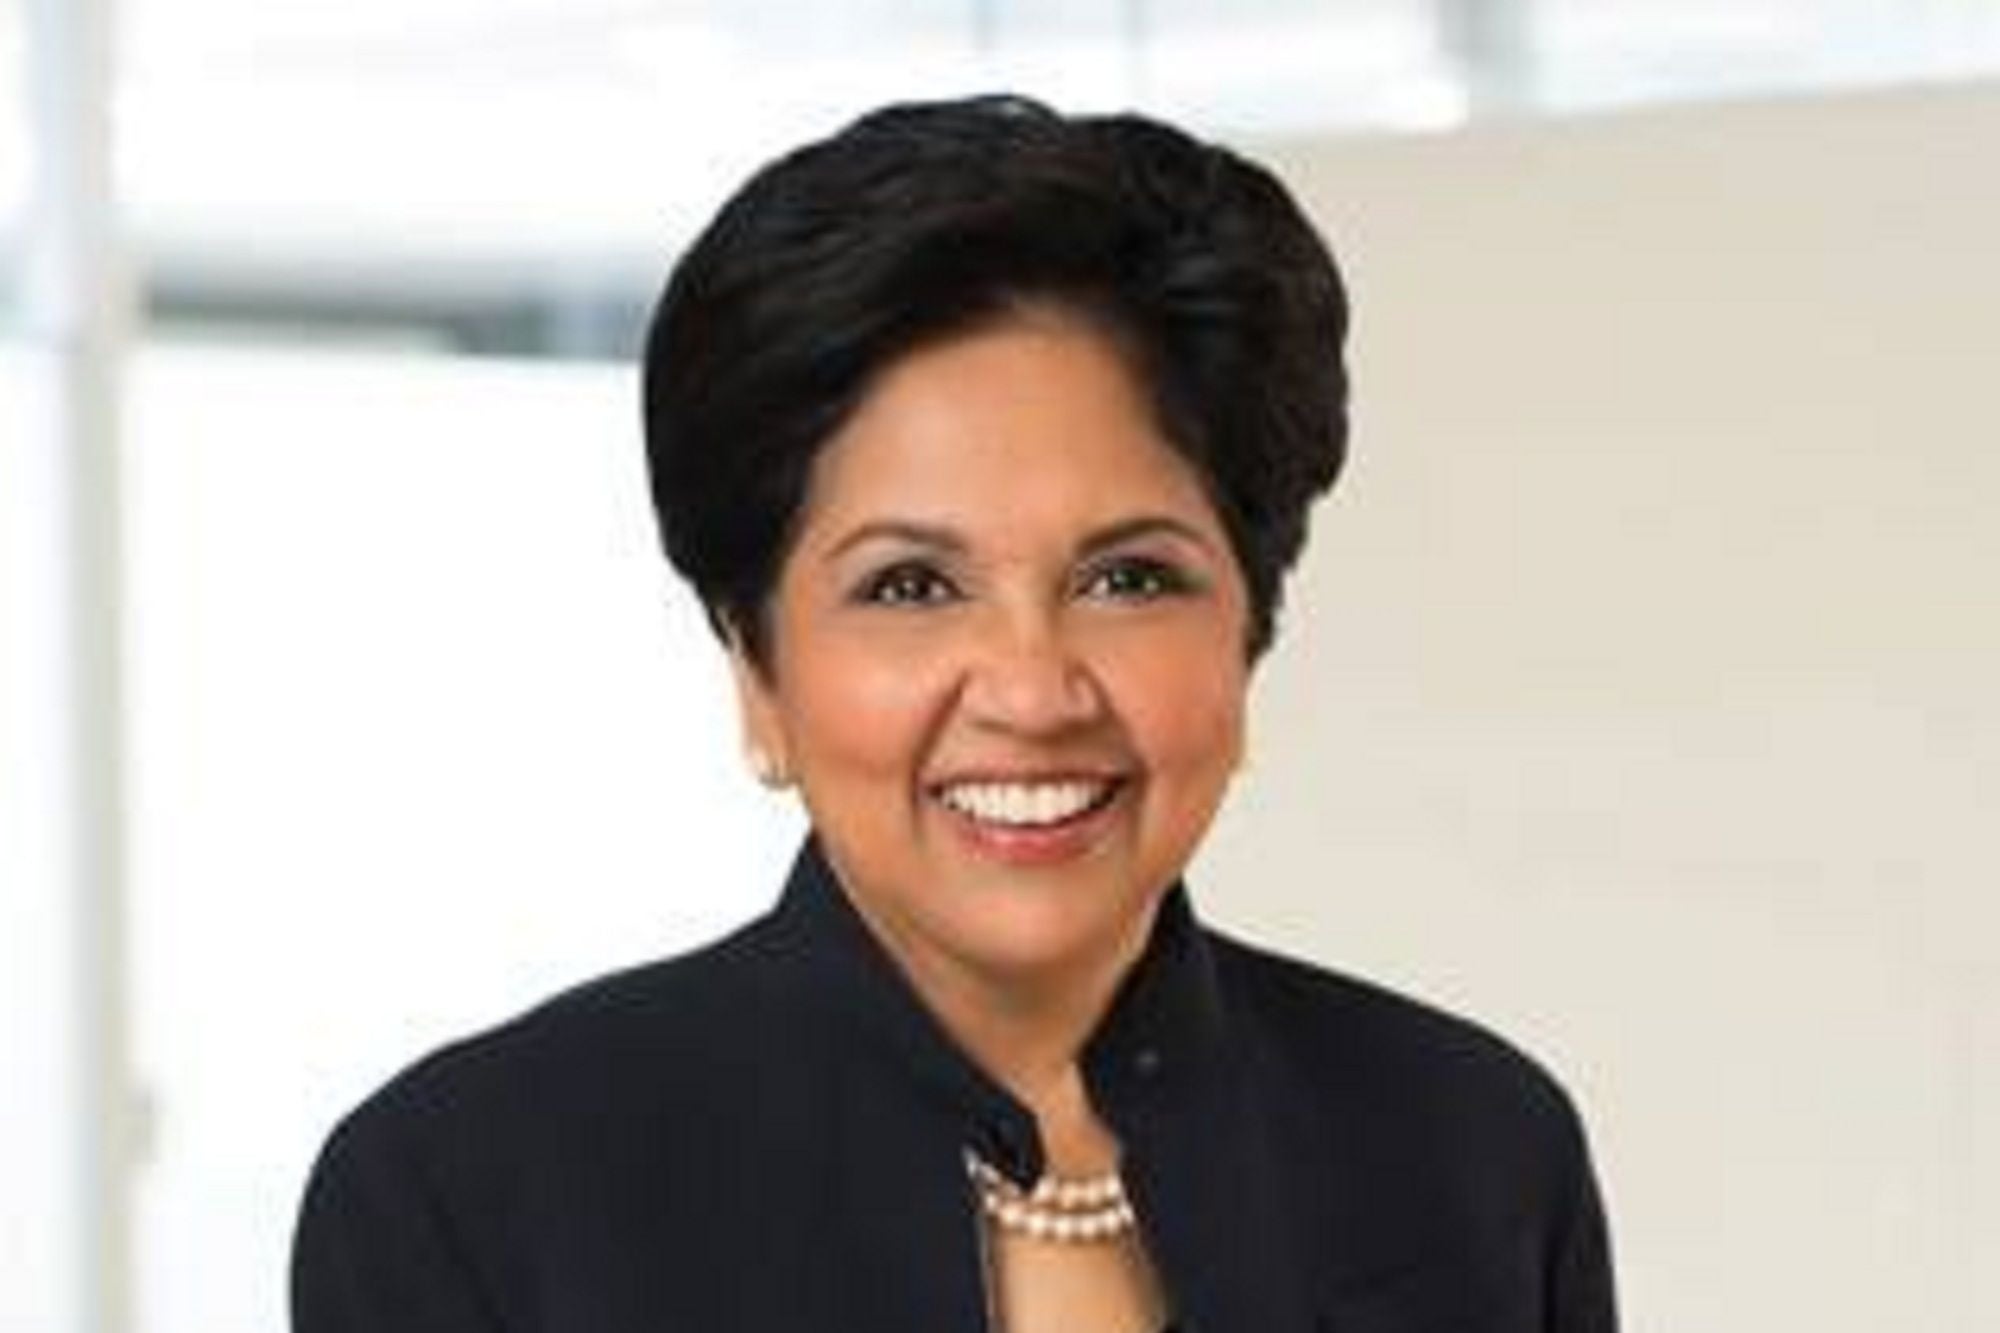 One of World's Most Powerful Leader Indra Nooyi to Step Down as PepsiCo CEO After 12 Years